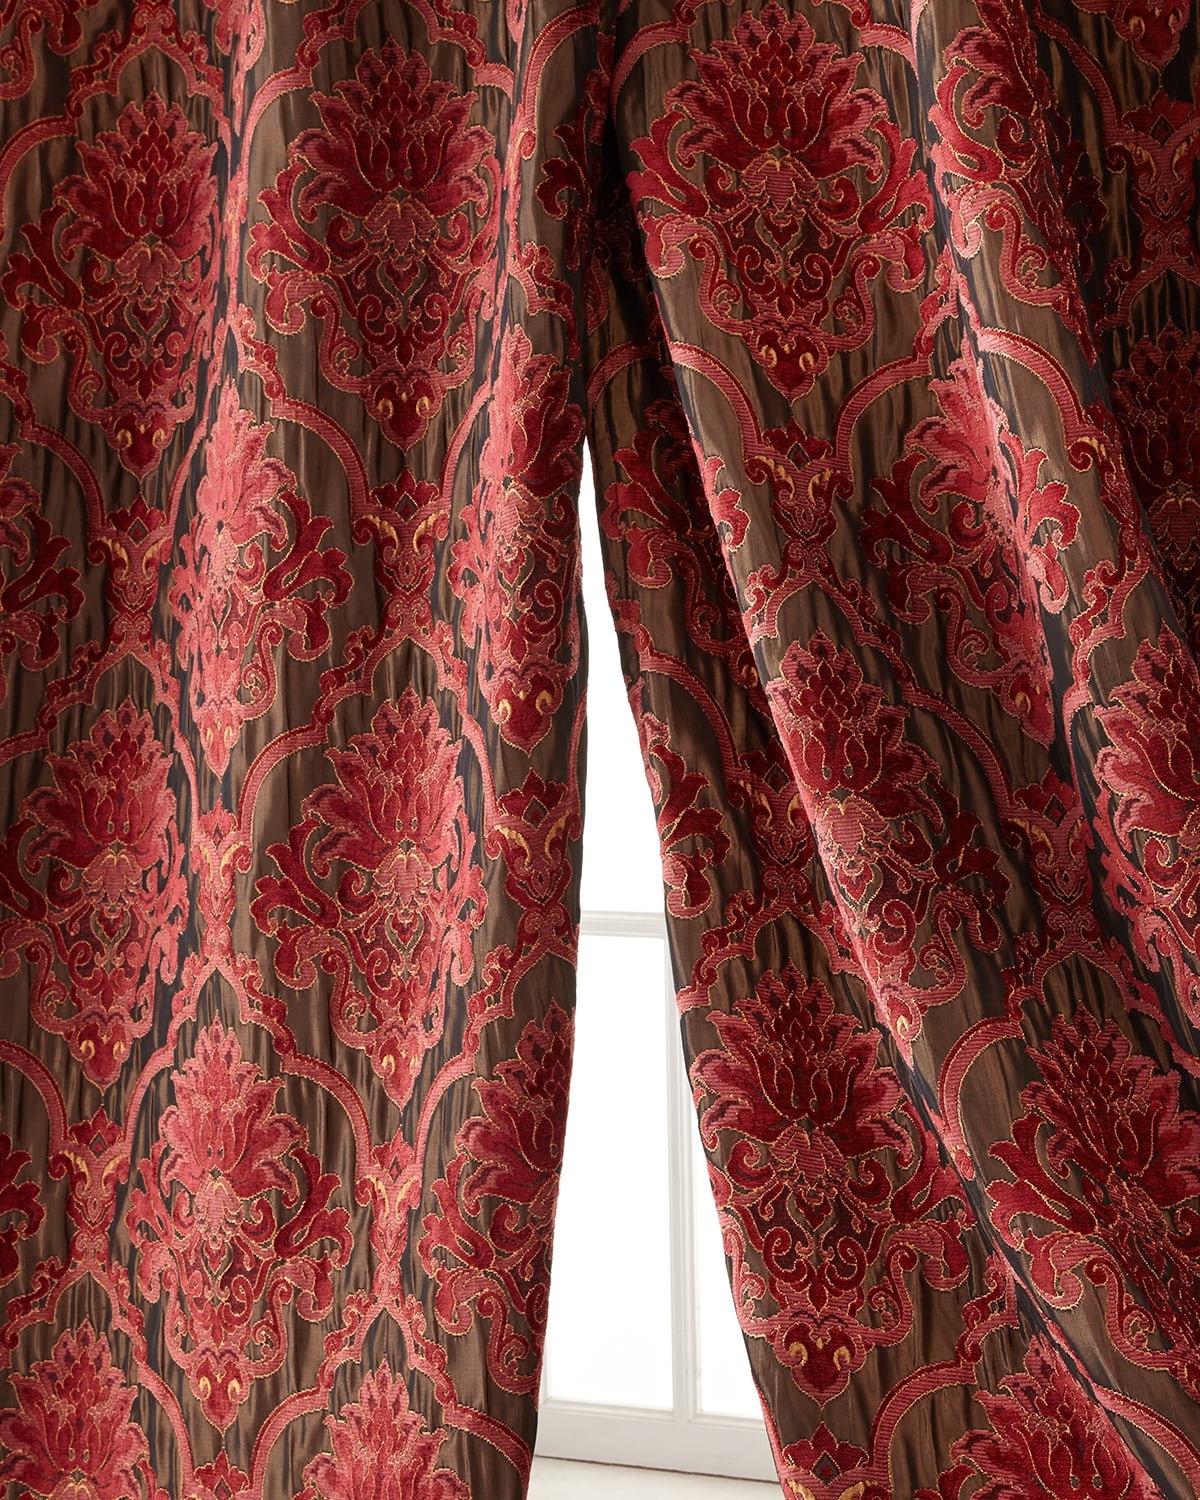 Image Isabella Collection by Kathy Fielder Each Maria Christina Curtain, 108"L